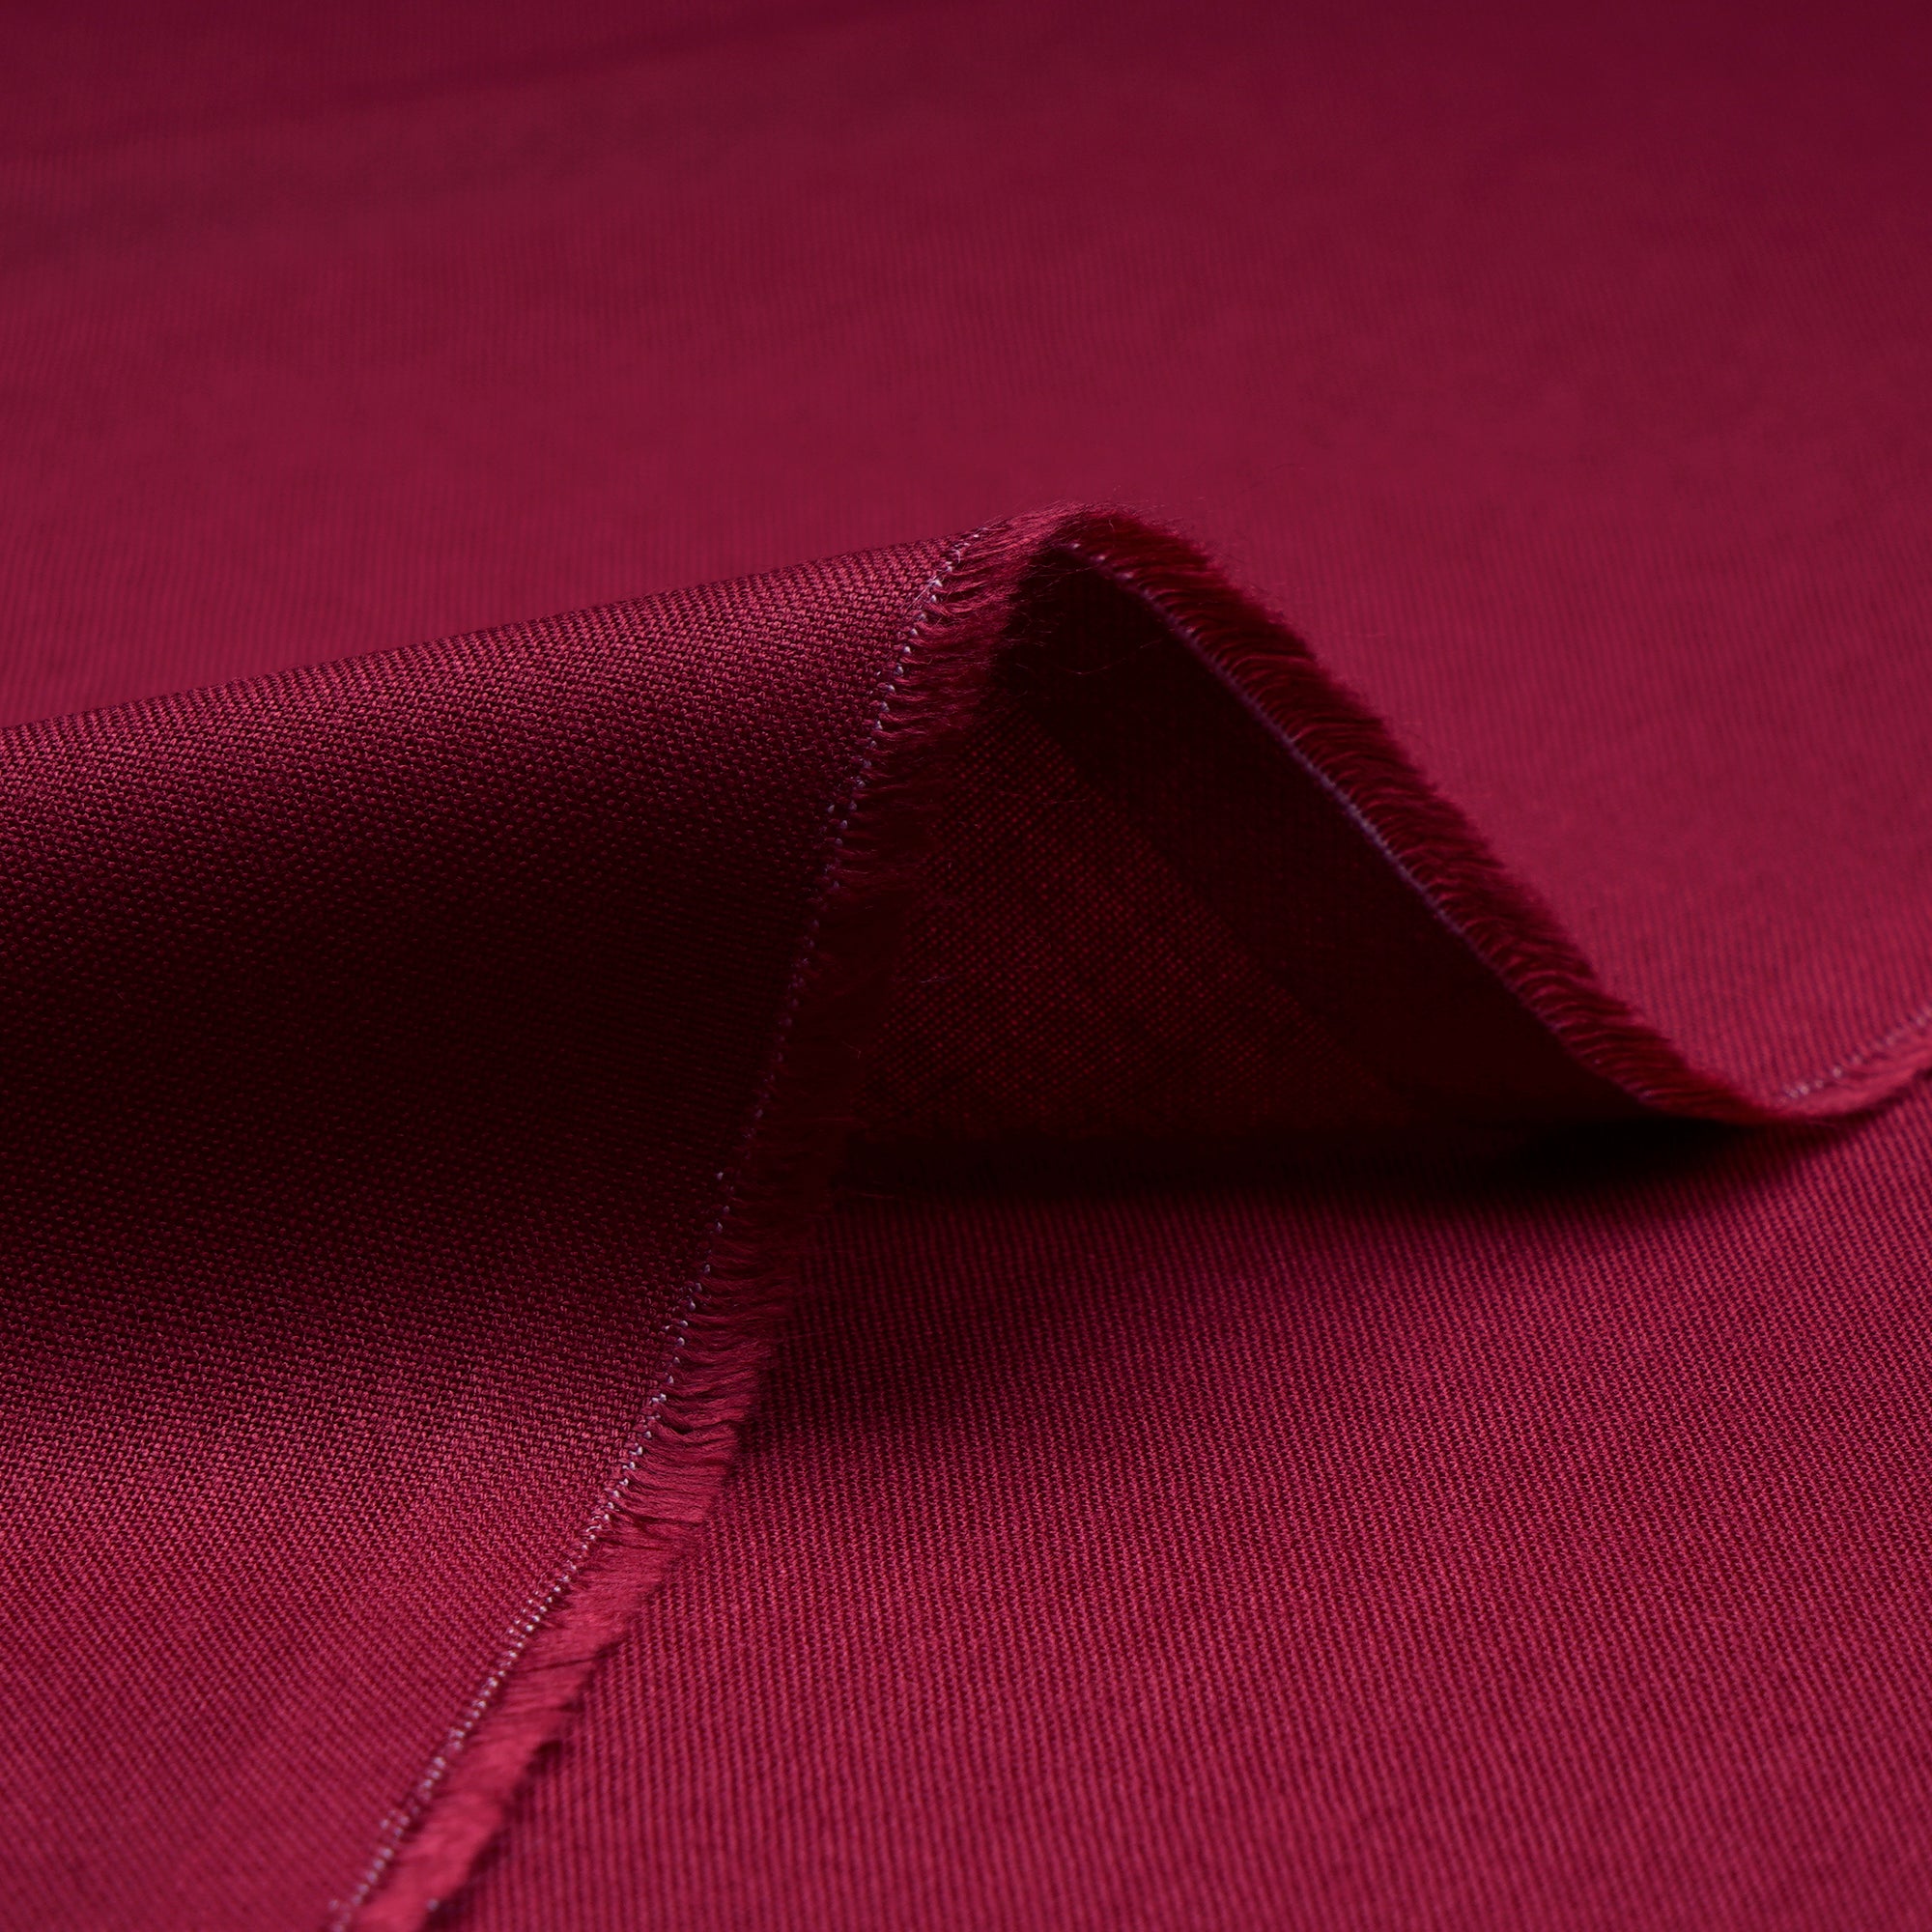 Maroon Mill Dyed Rayon Fabric